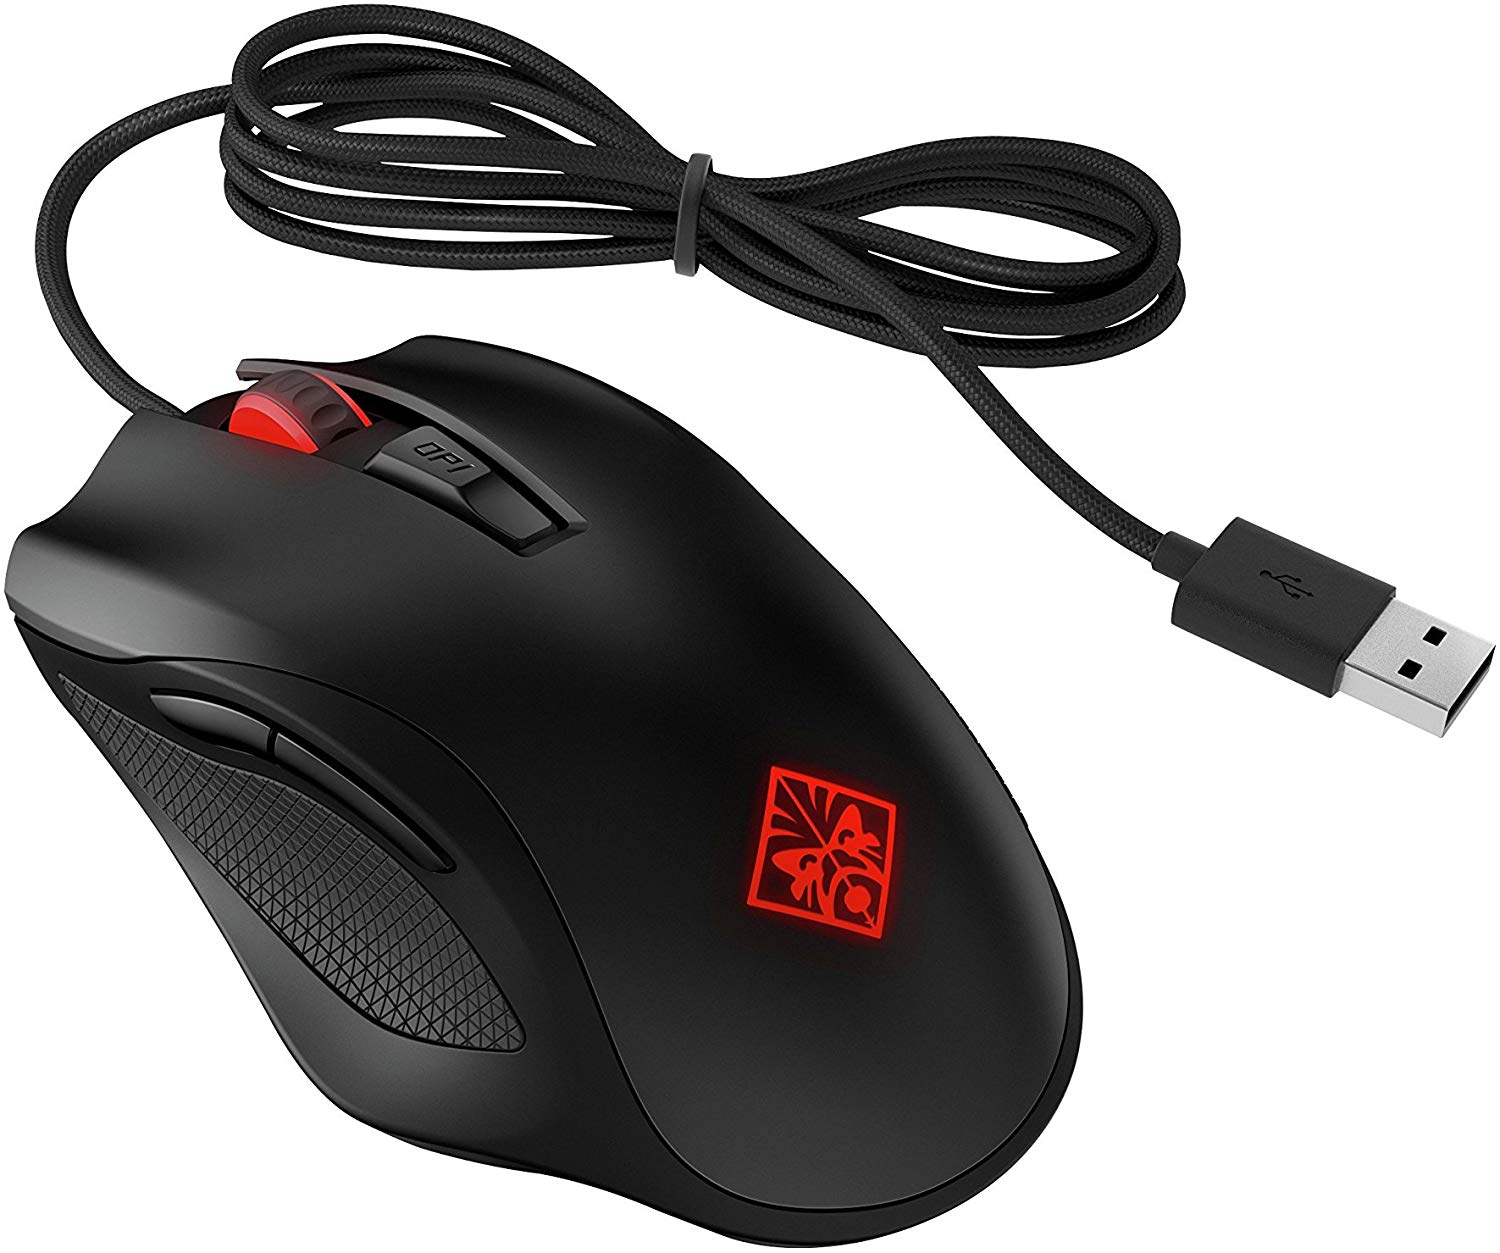 Omen by hp wired usb gaming mouse 600 (black/red)